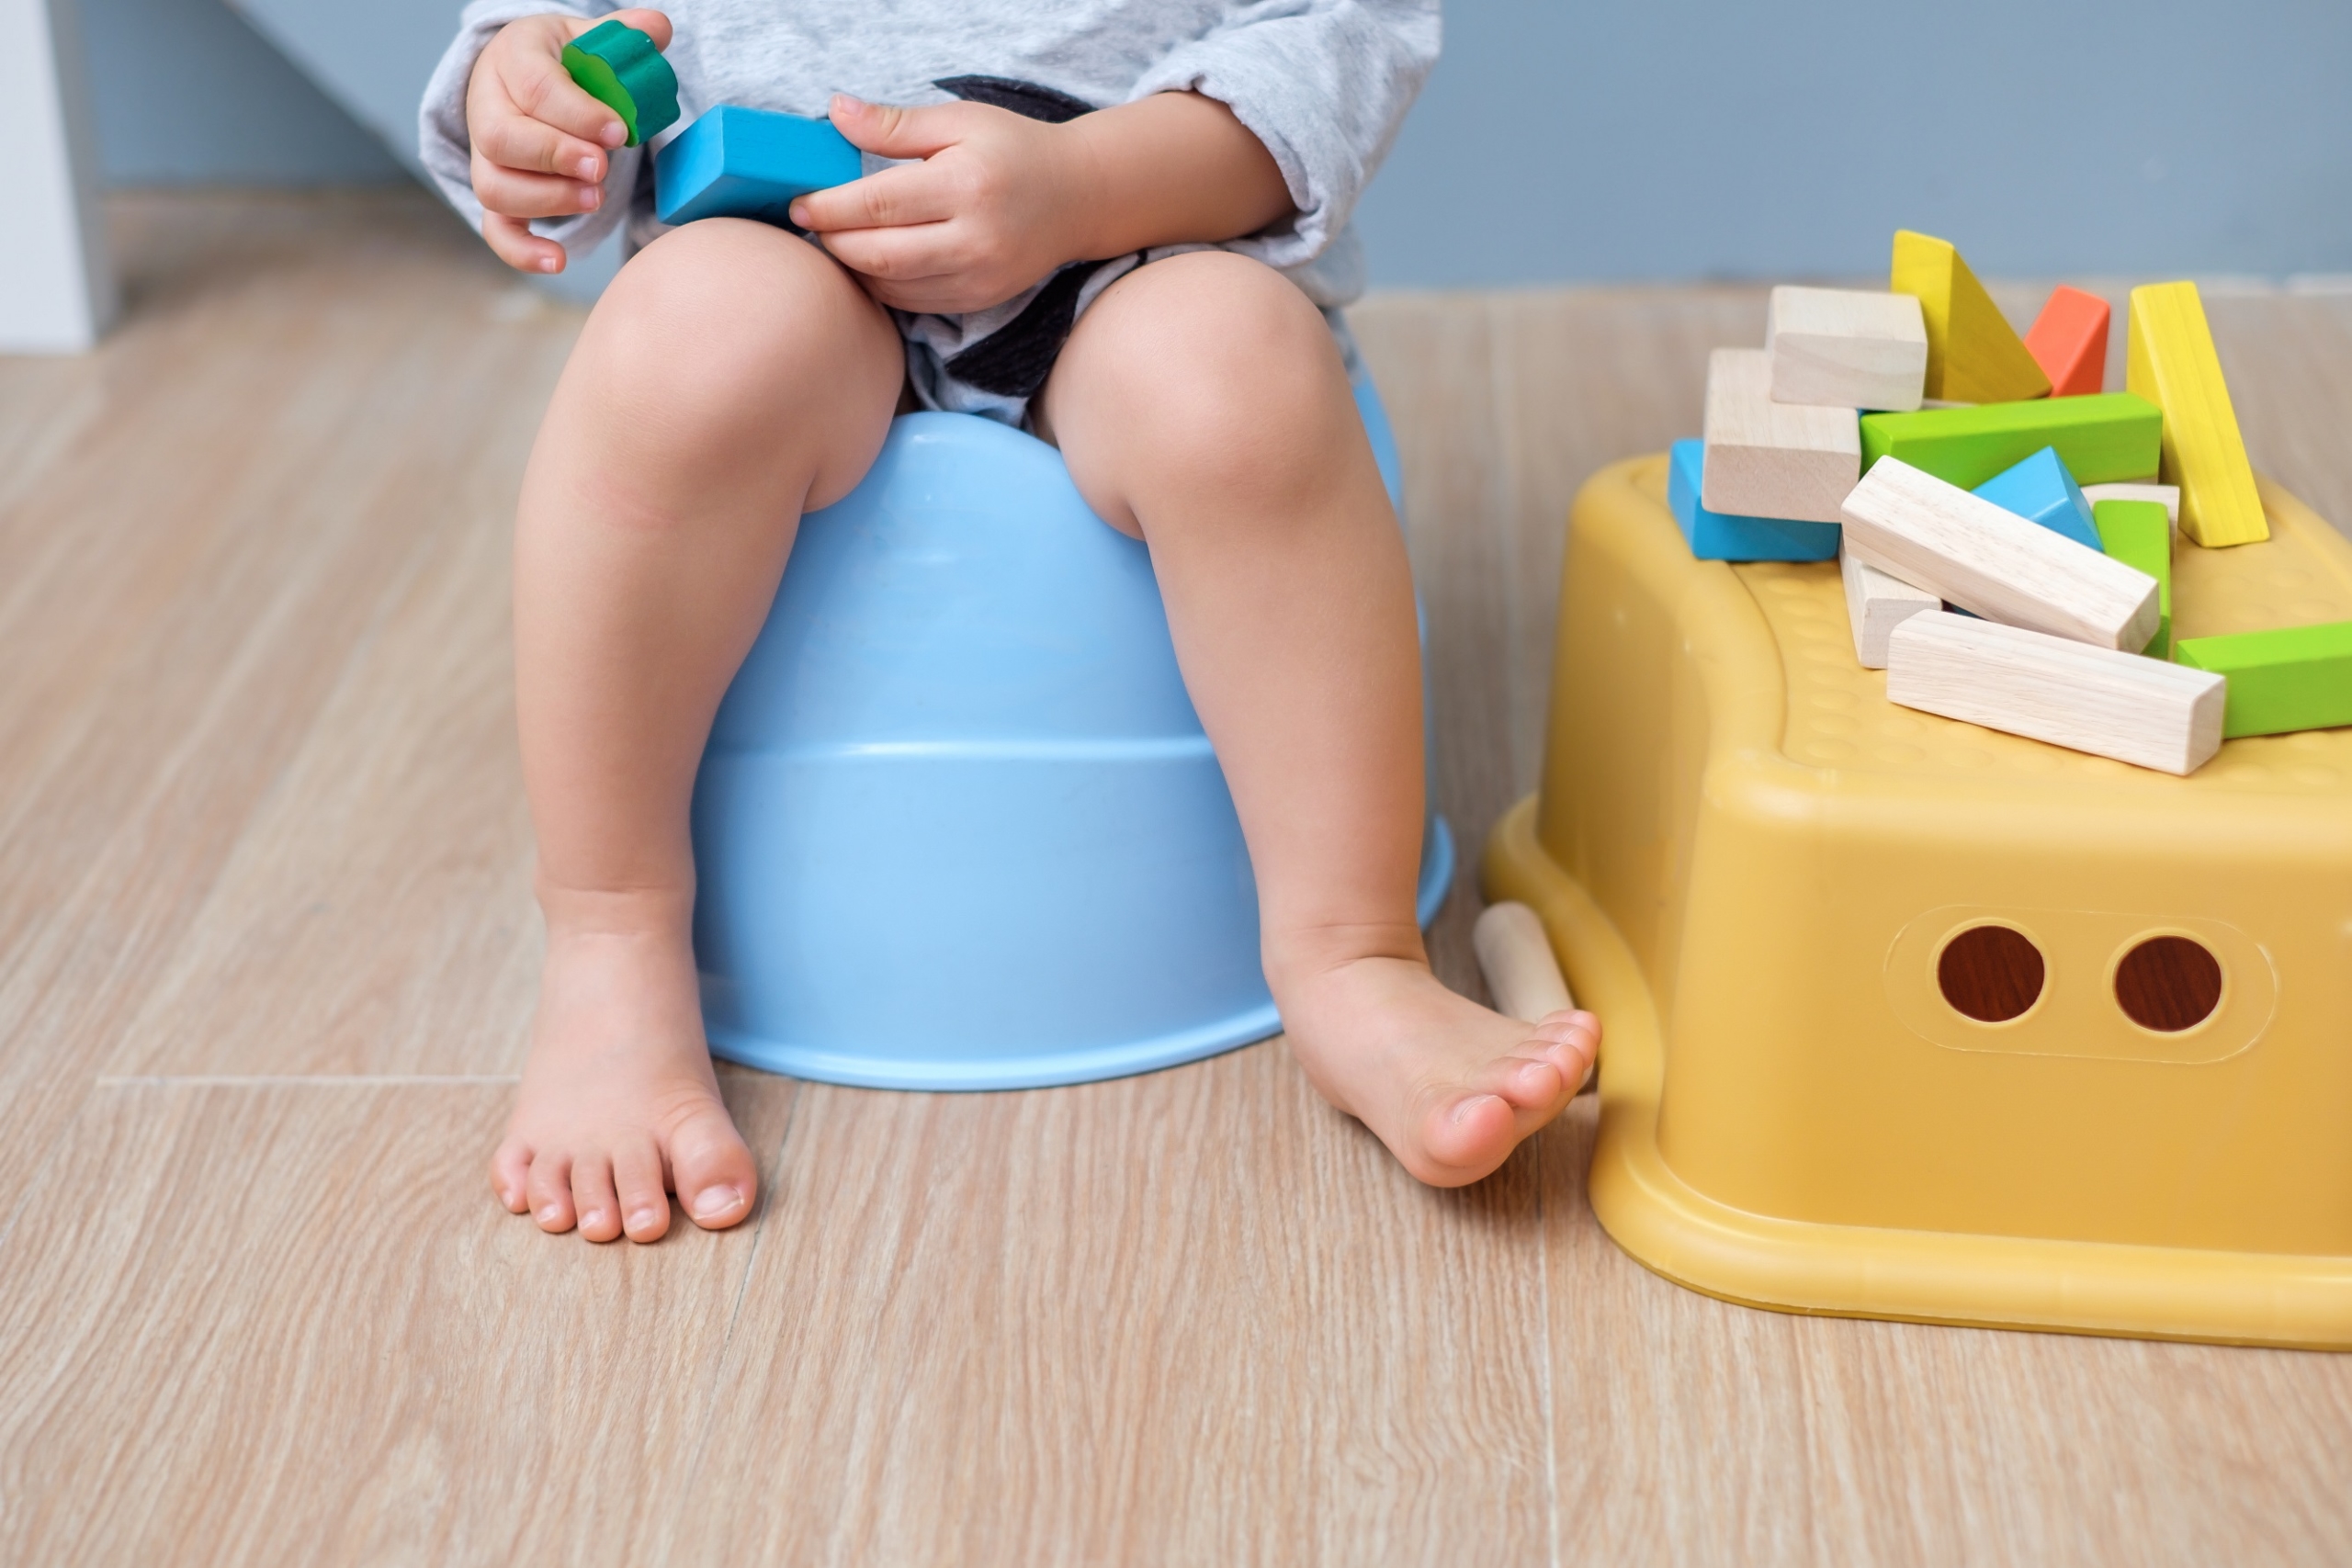 Child on toddler toilet with toys next to it